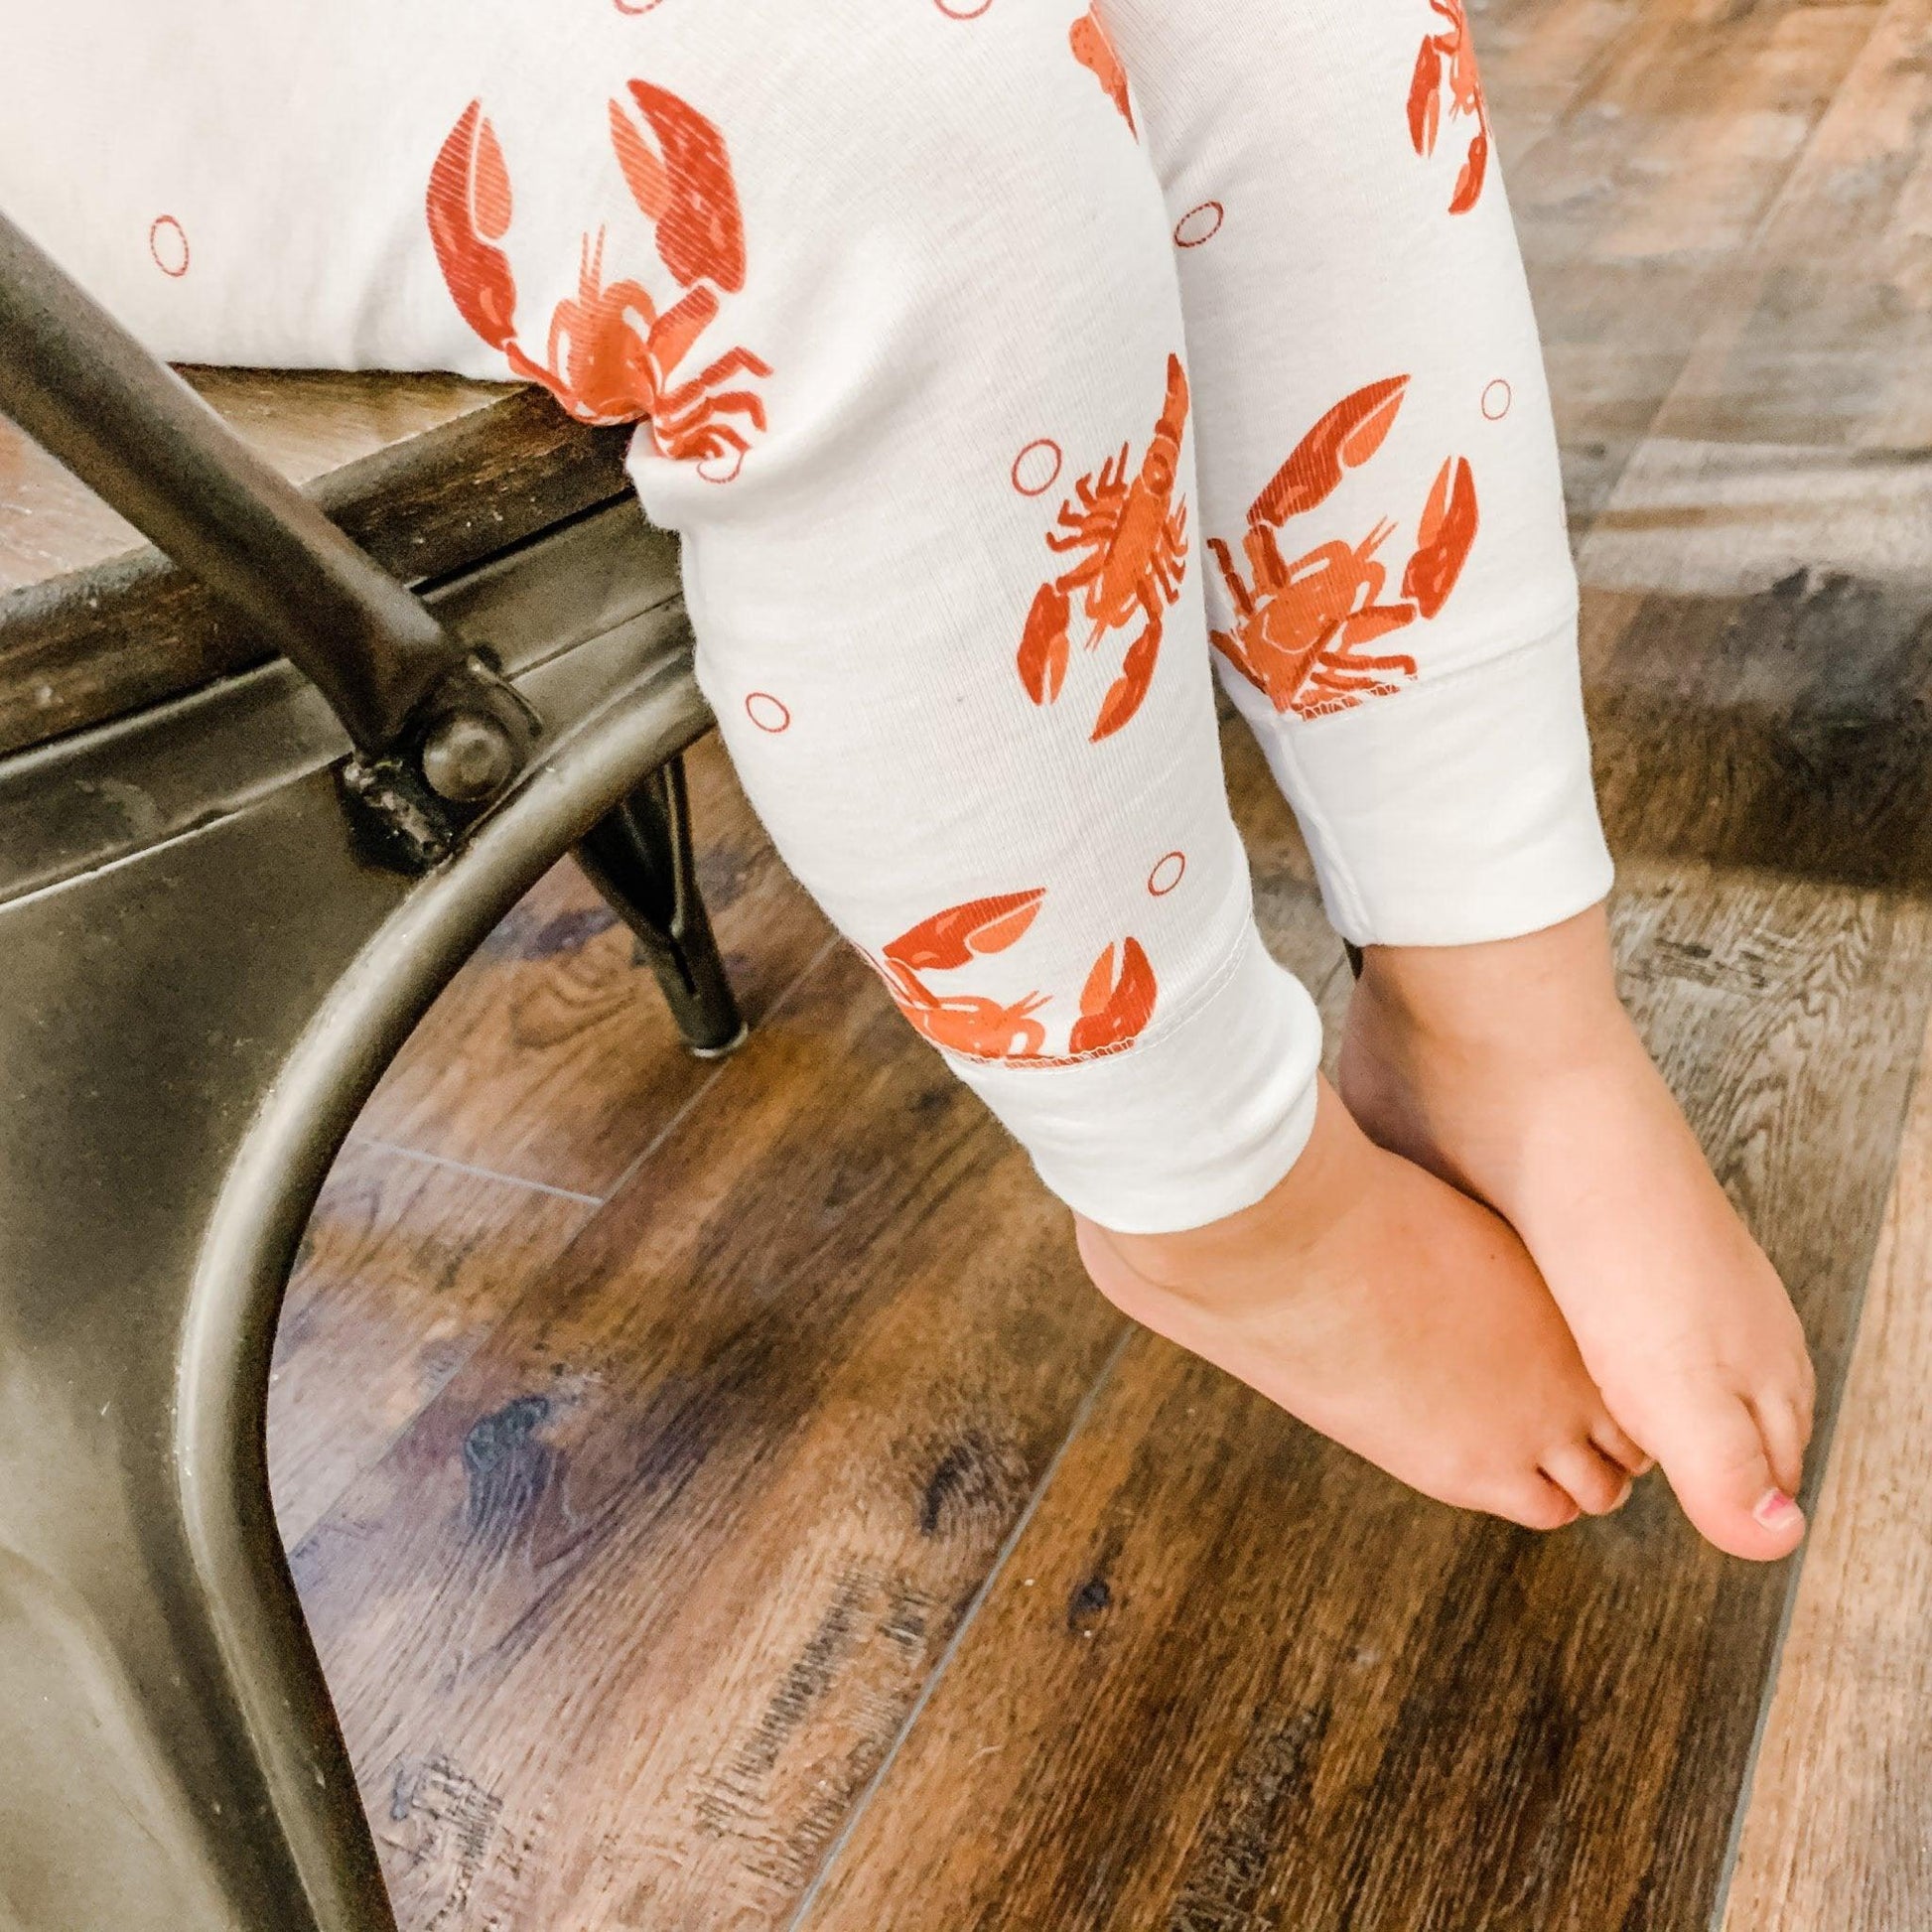 Toddler wearing white pajamas with red lobsters and crawfish, smiling and sitting on a white bed.